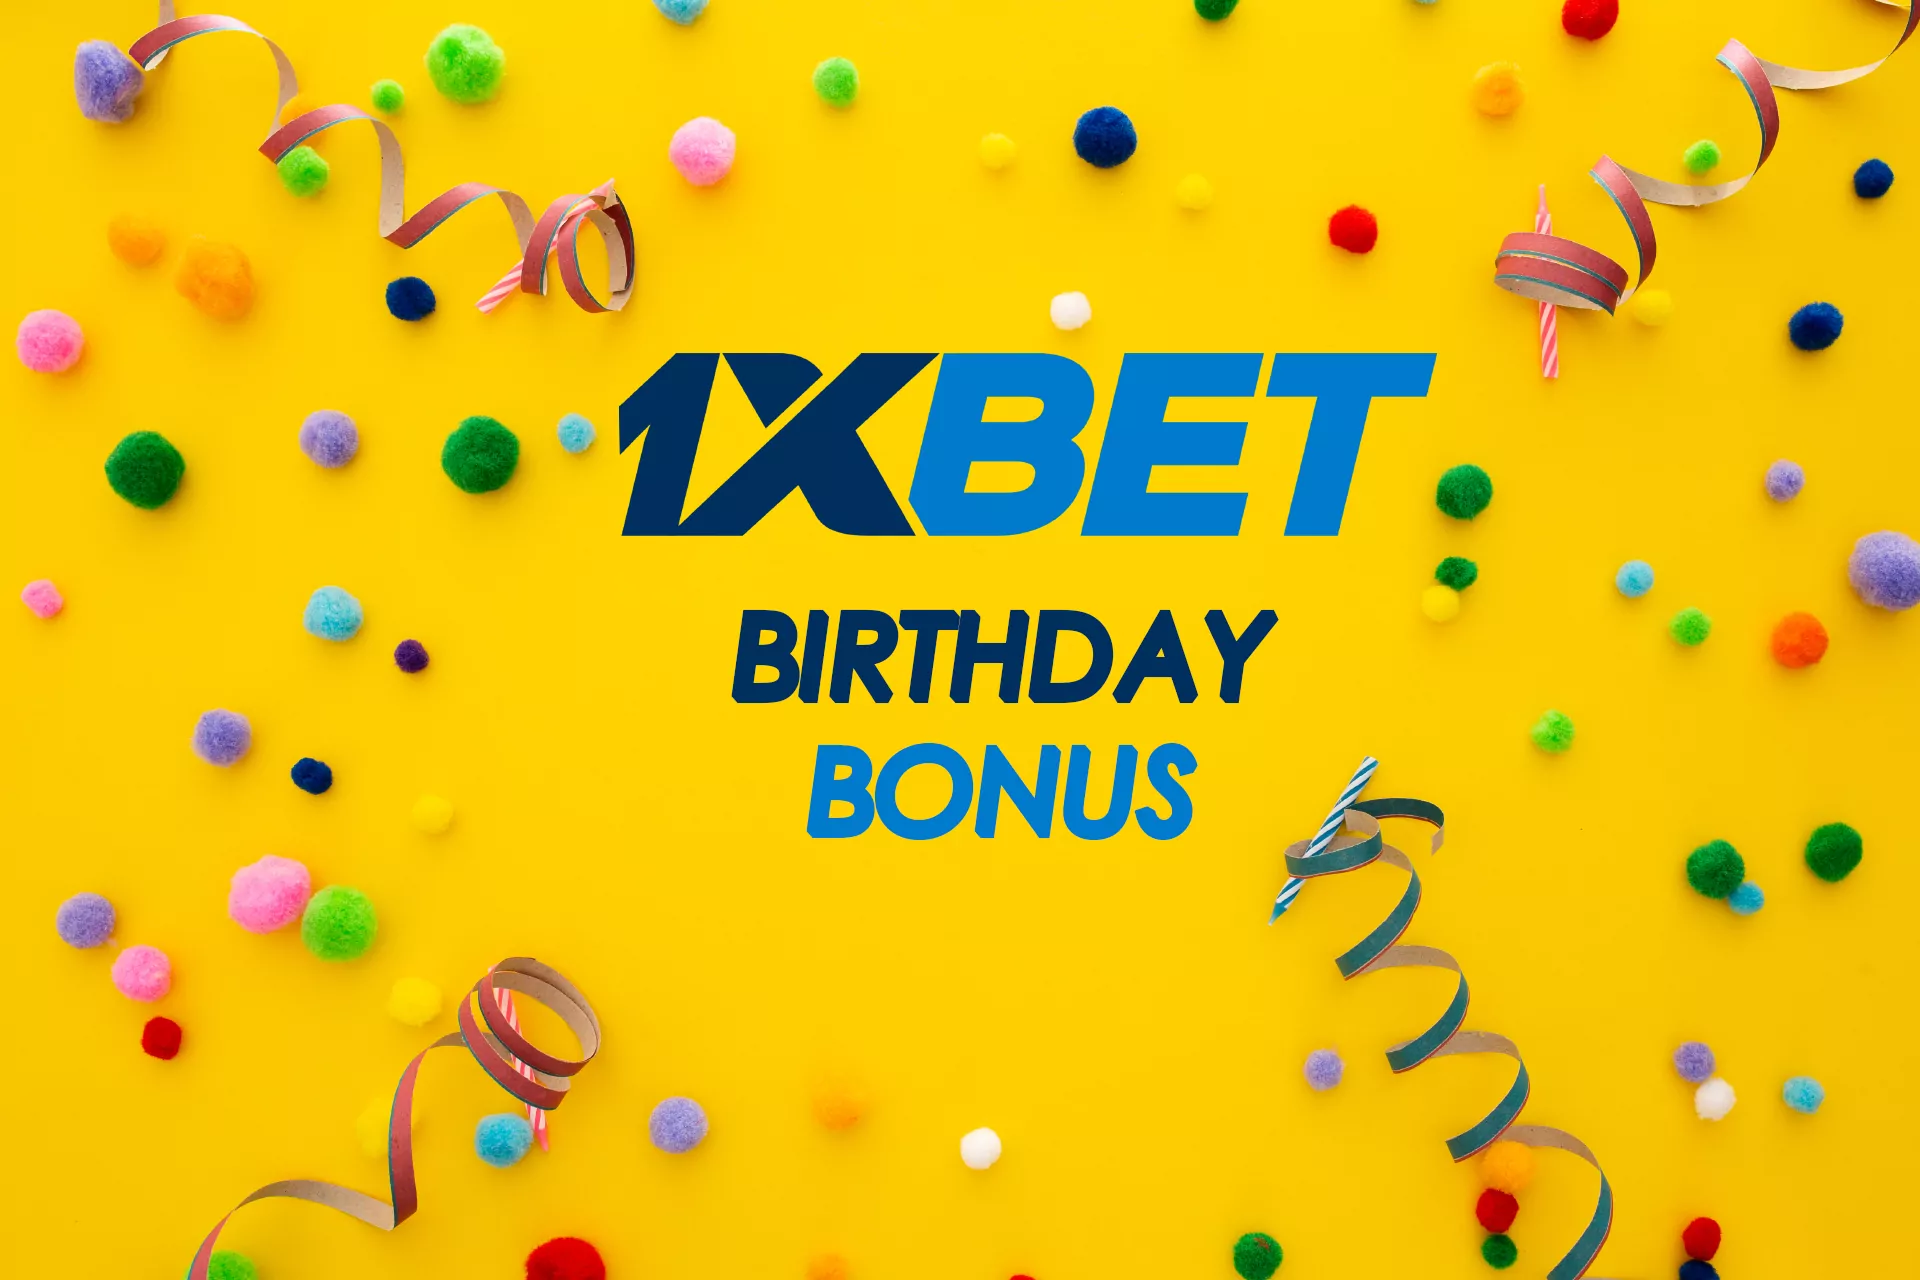 Get your personal bonus from 1xBet on your birthday.